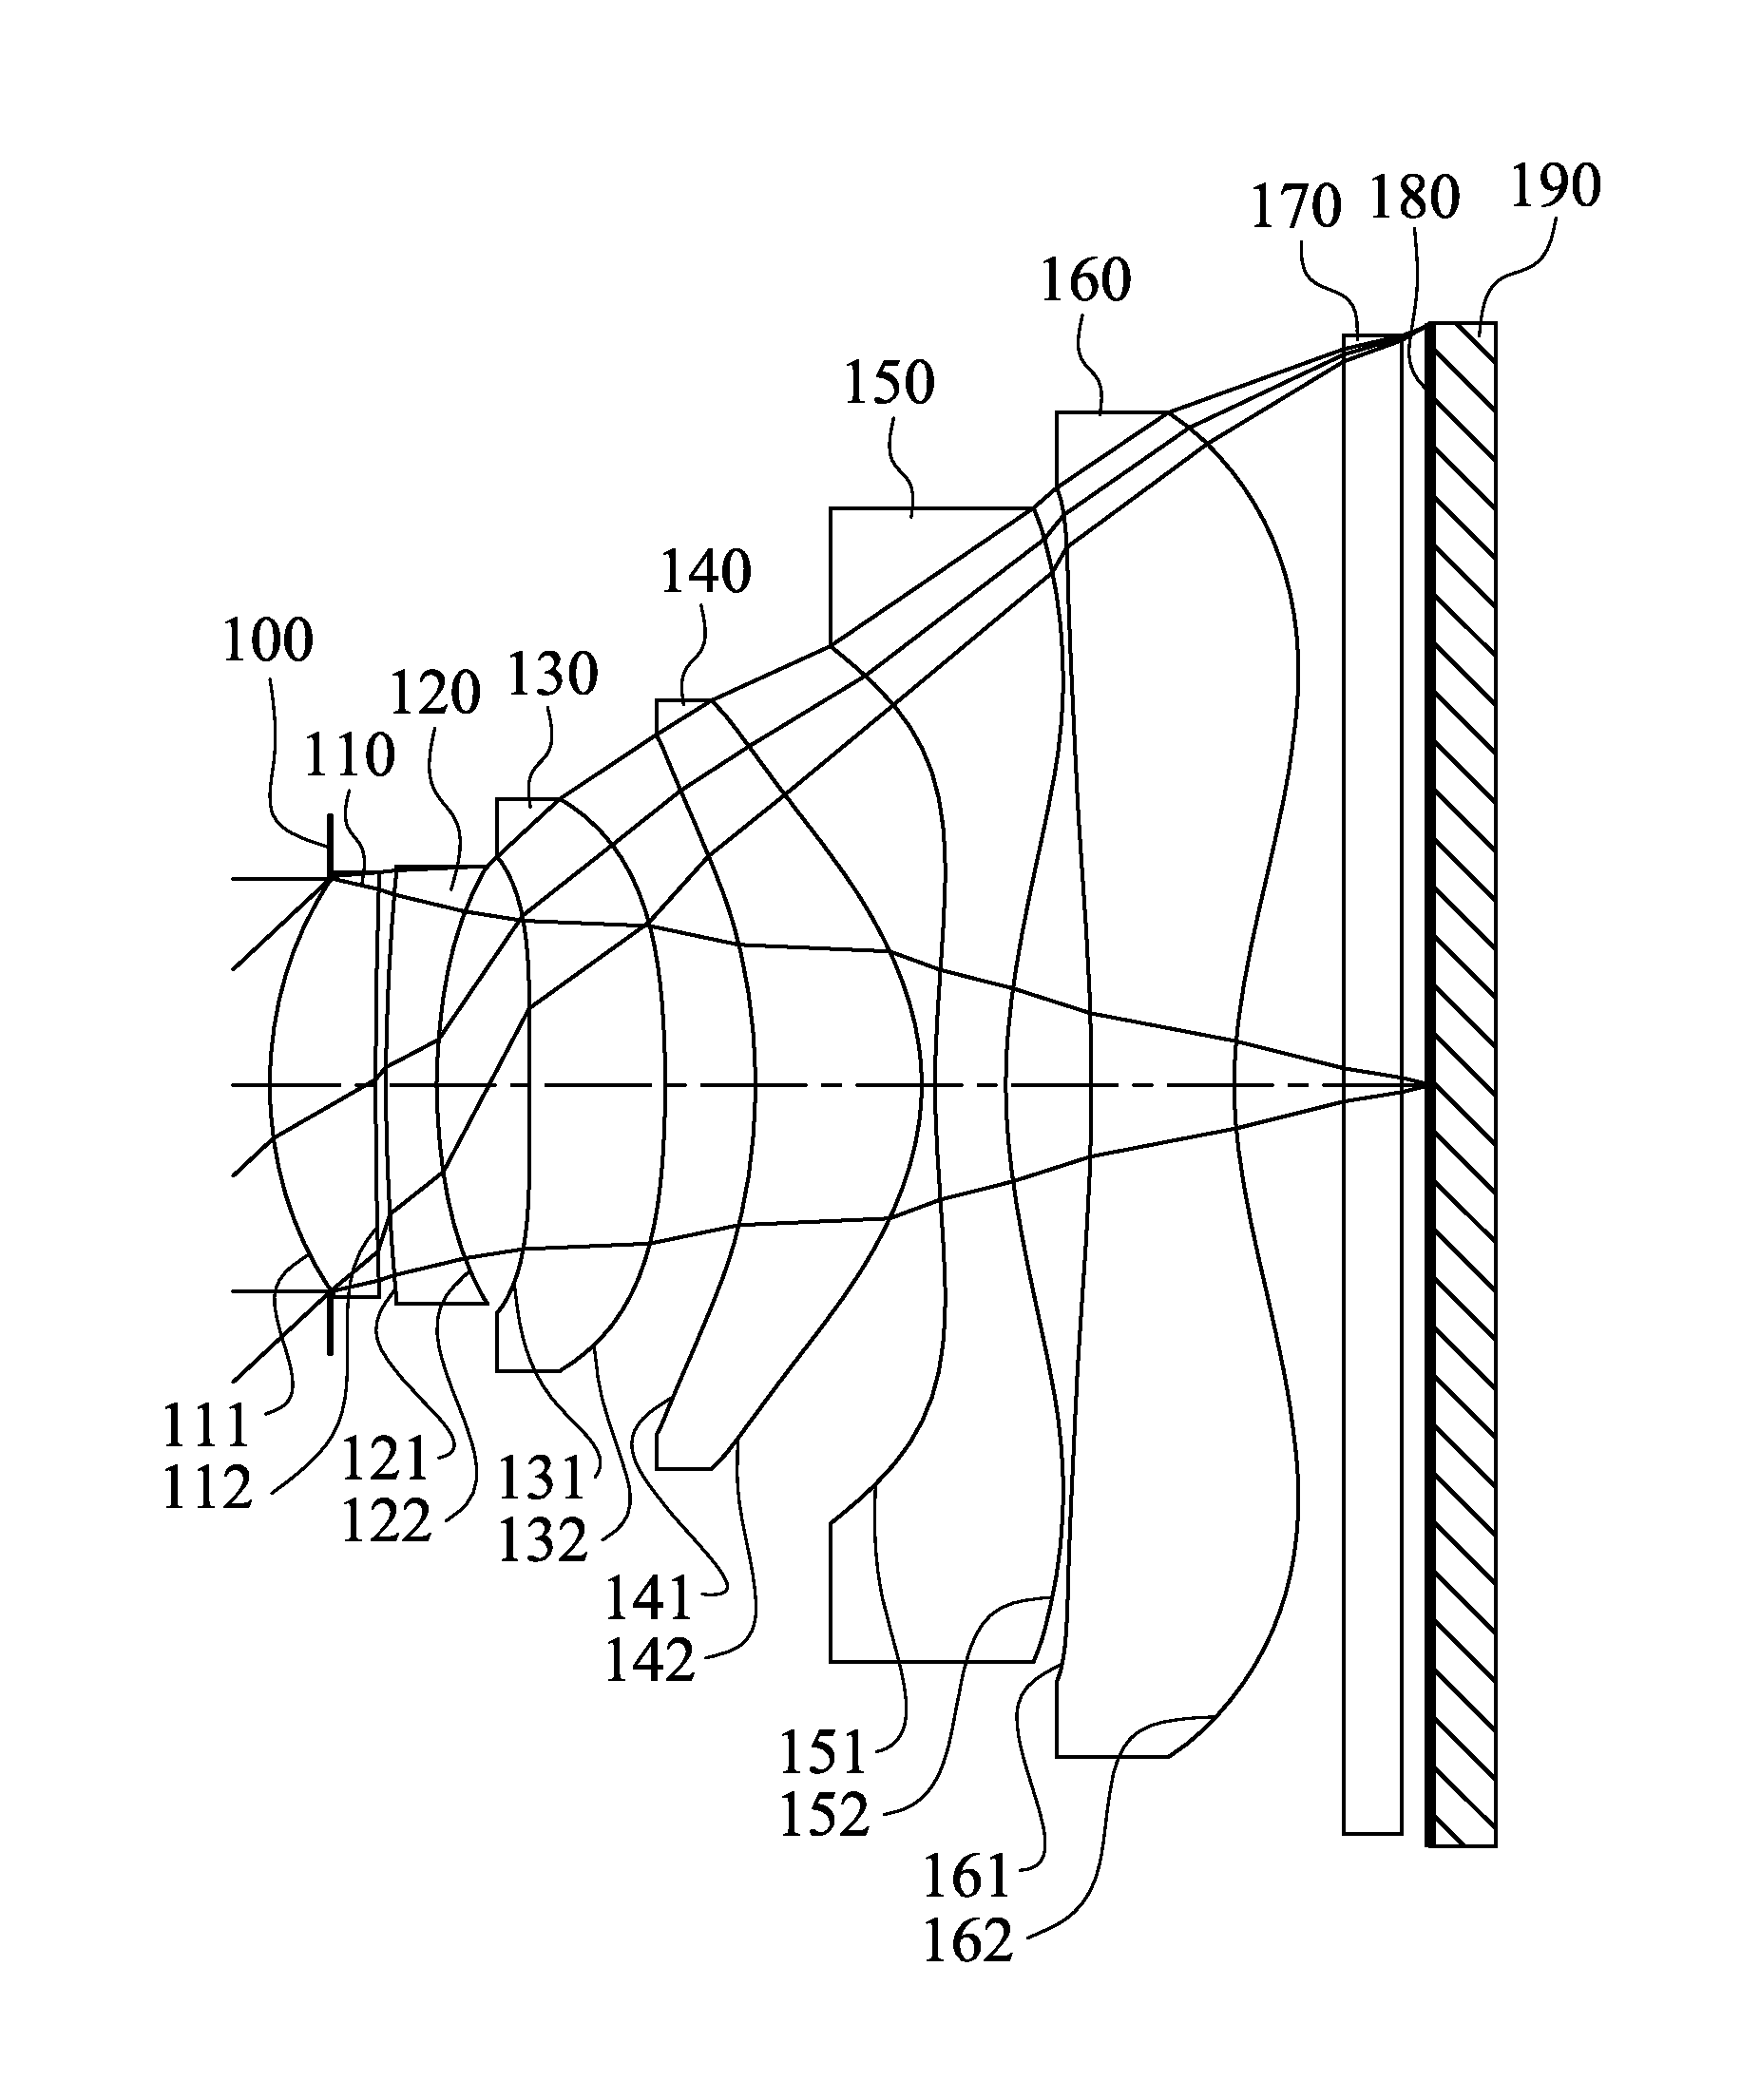 Photographing optical lens, image capturing device and electronic device